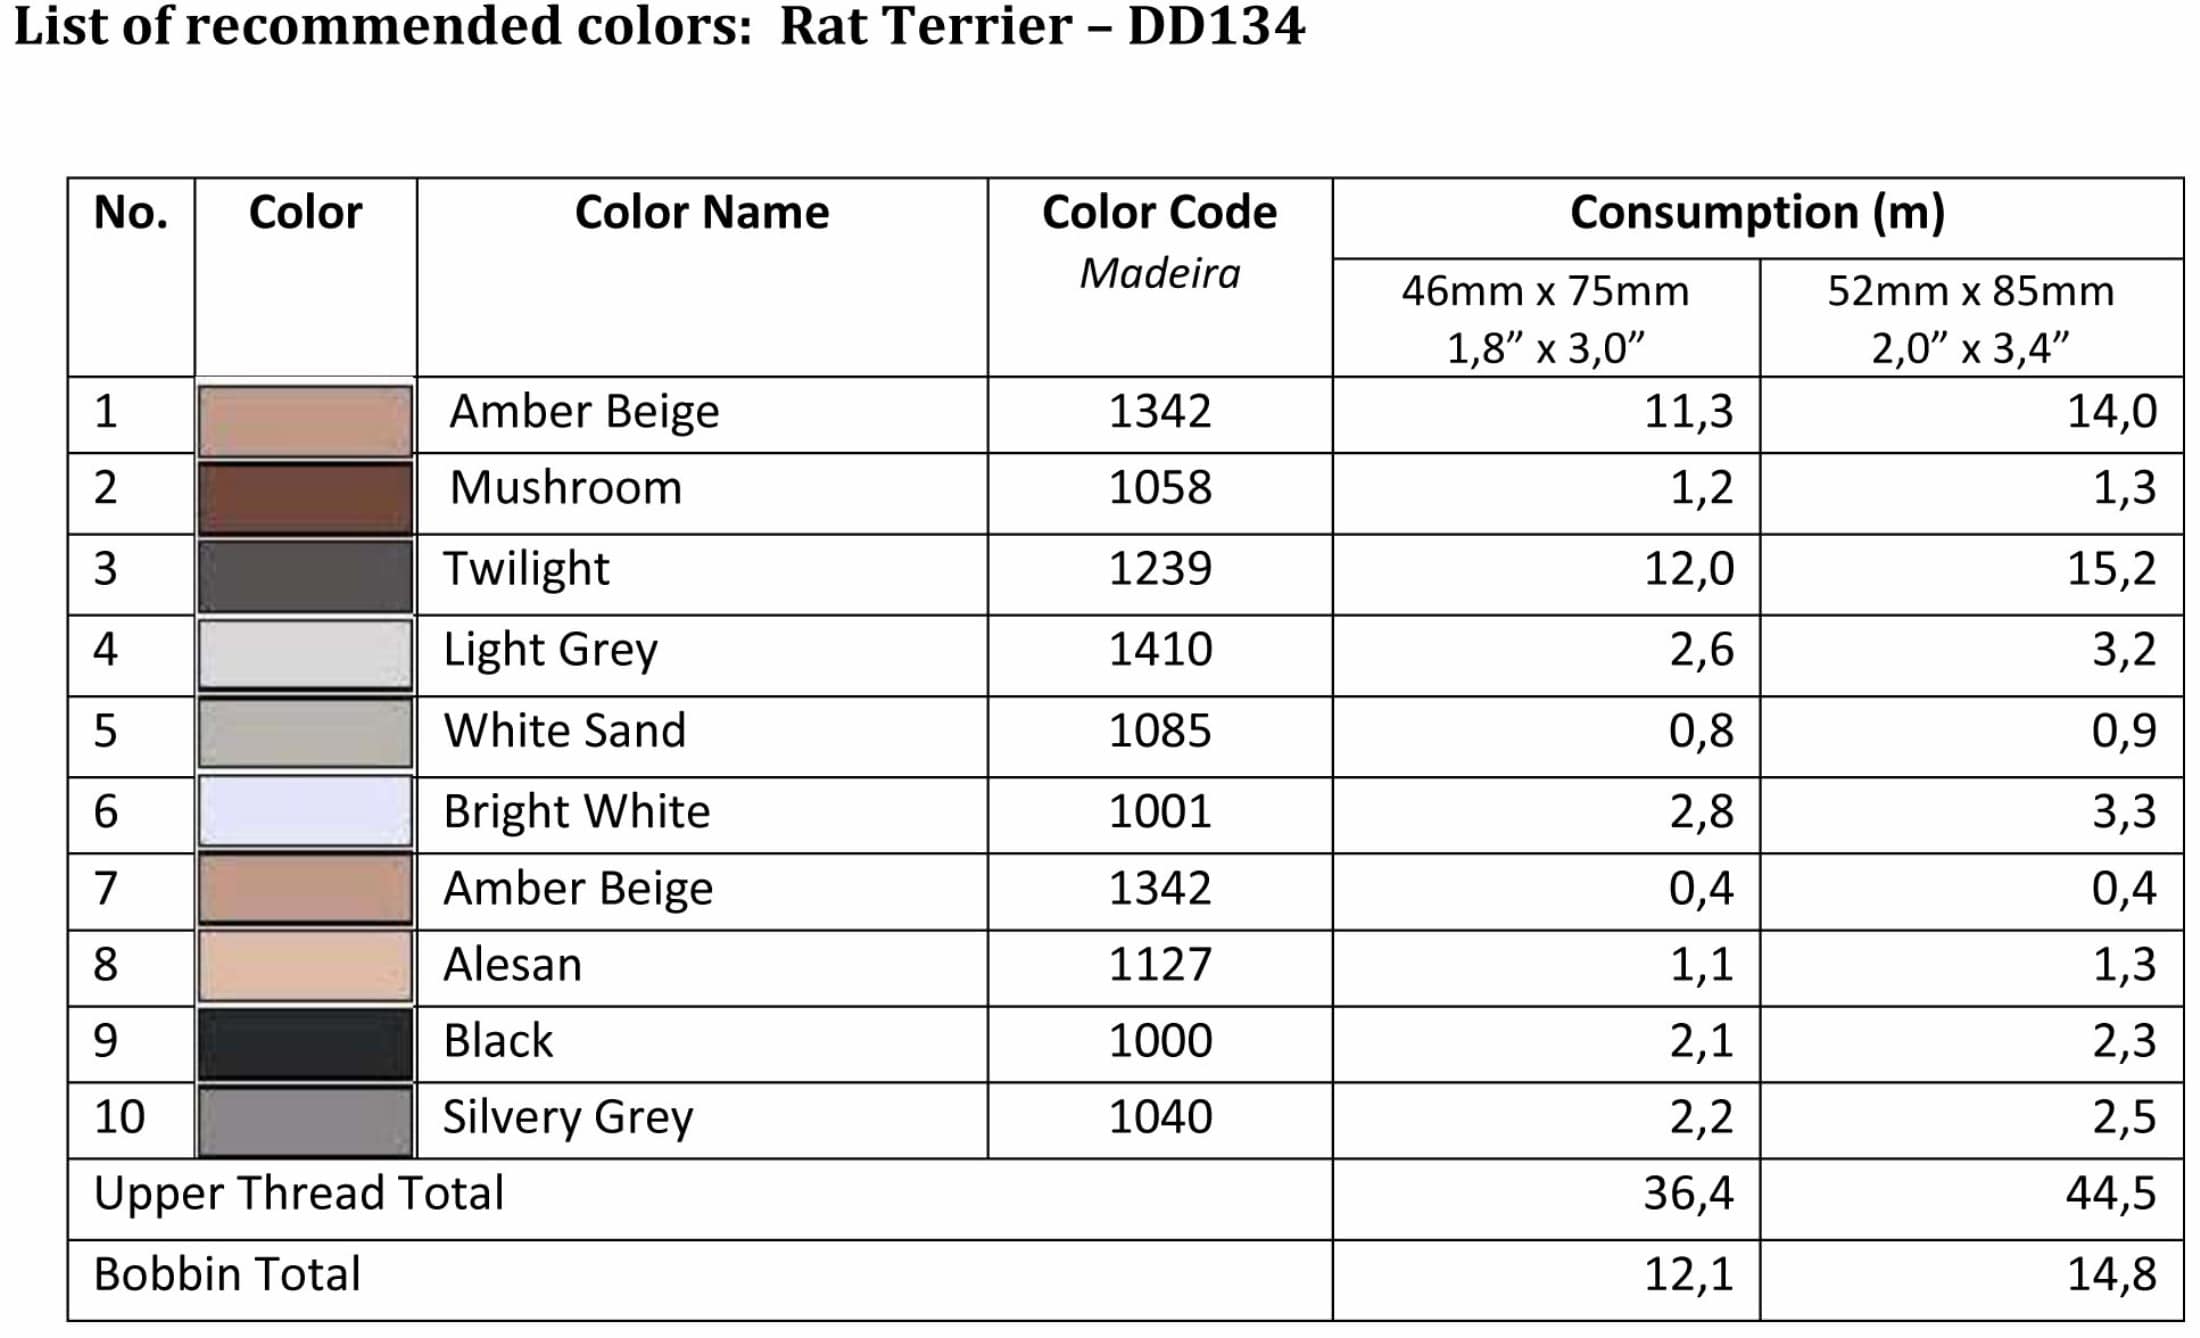 List of recommended colors - DD134